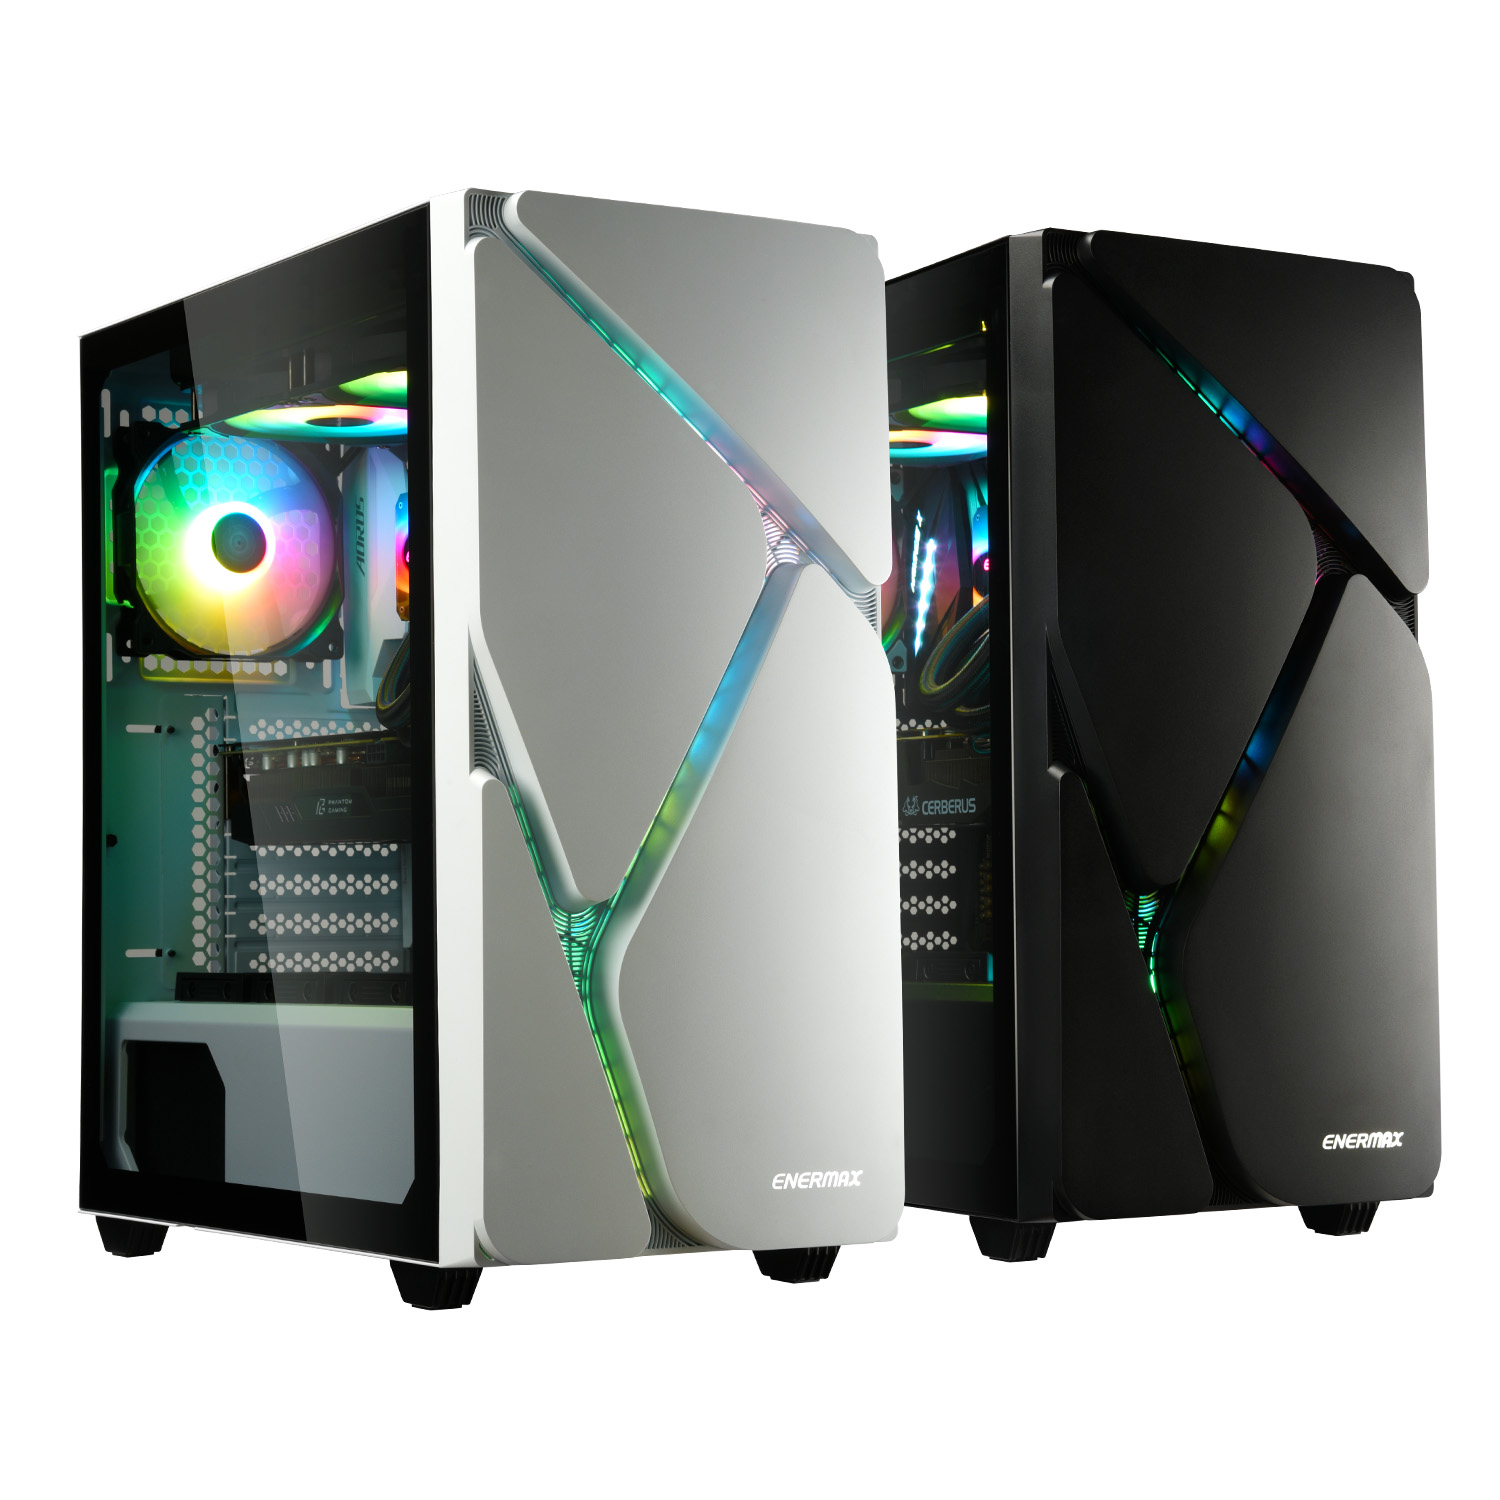 Ms30 Marbleshell Ms30 Mid Tower Black White Pc Case Products Enermax Technology Corporation